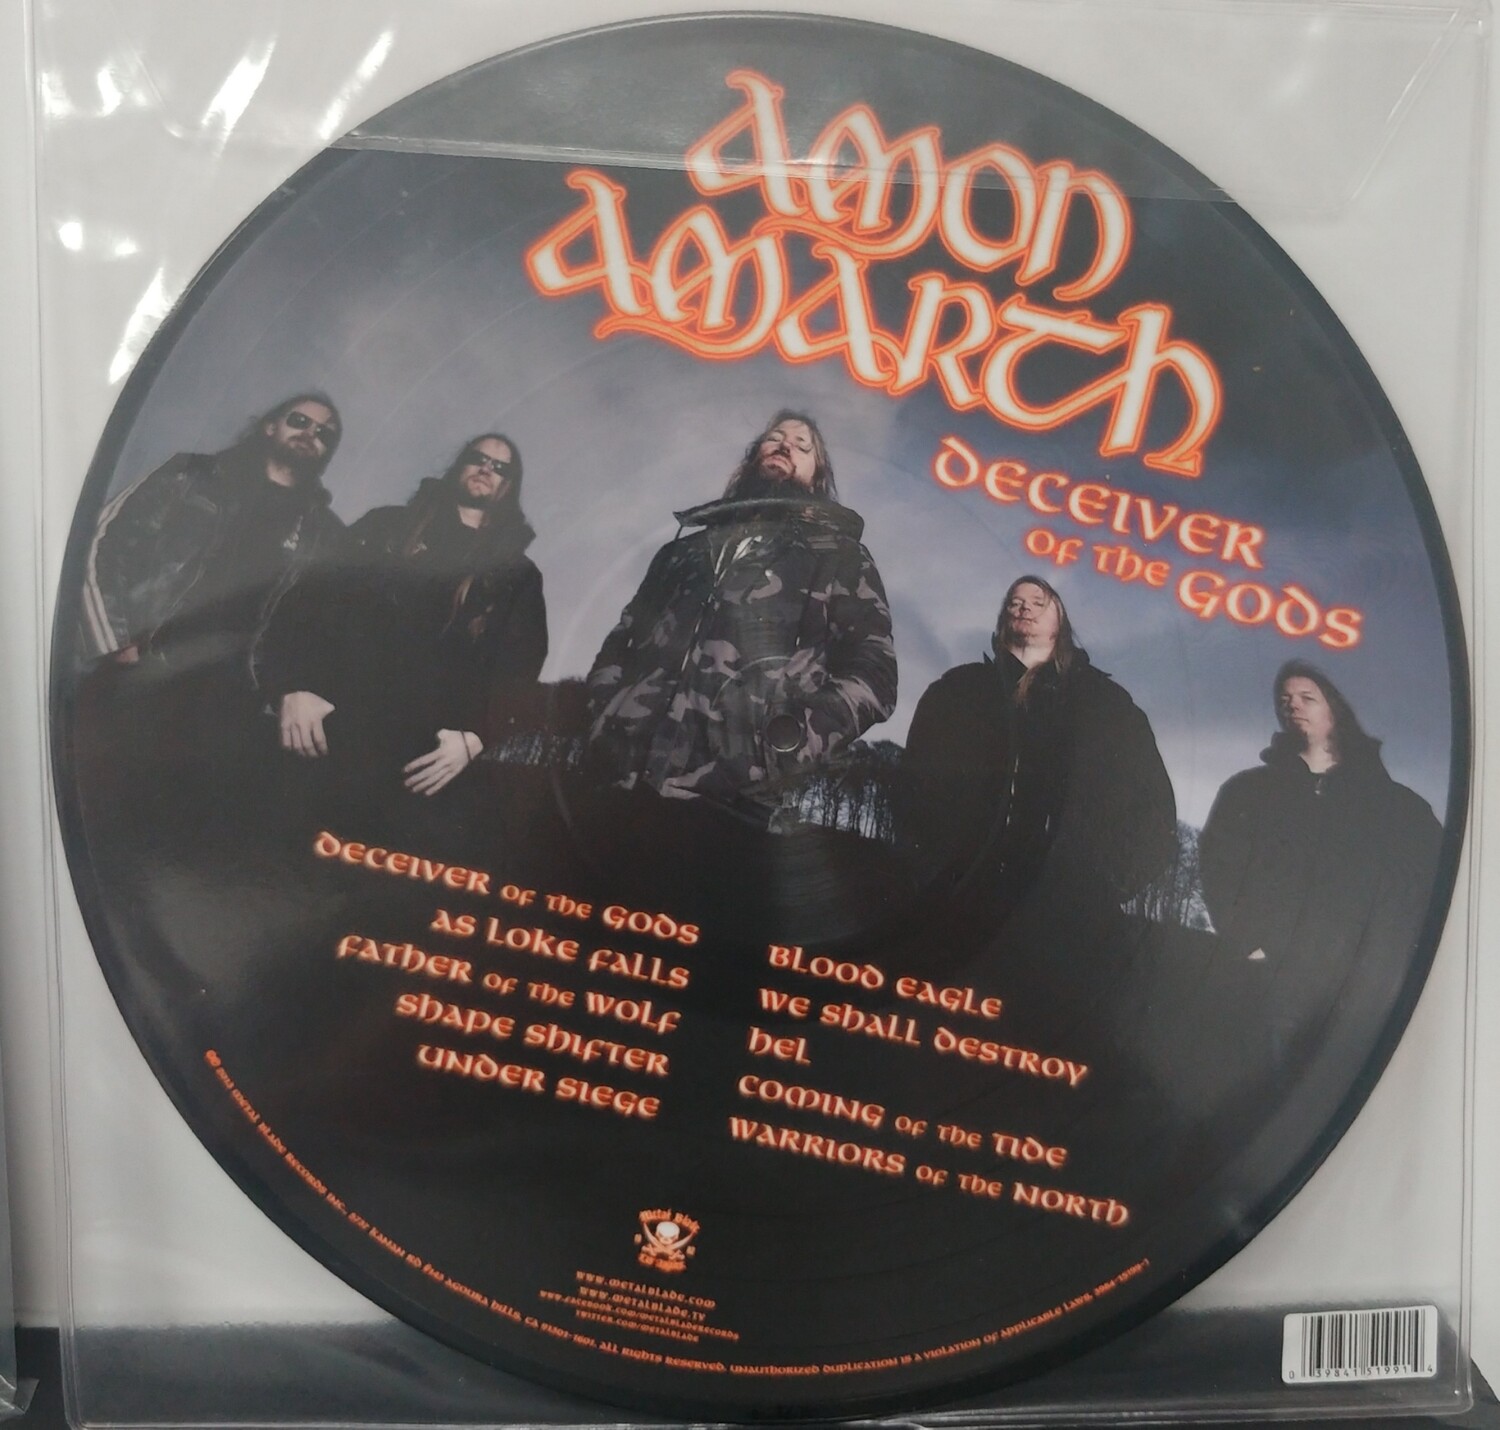 Amon Amarth - Deceiver of the gods (PICTURE DISC)